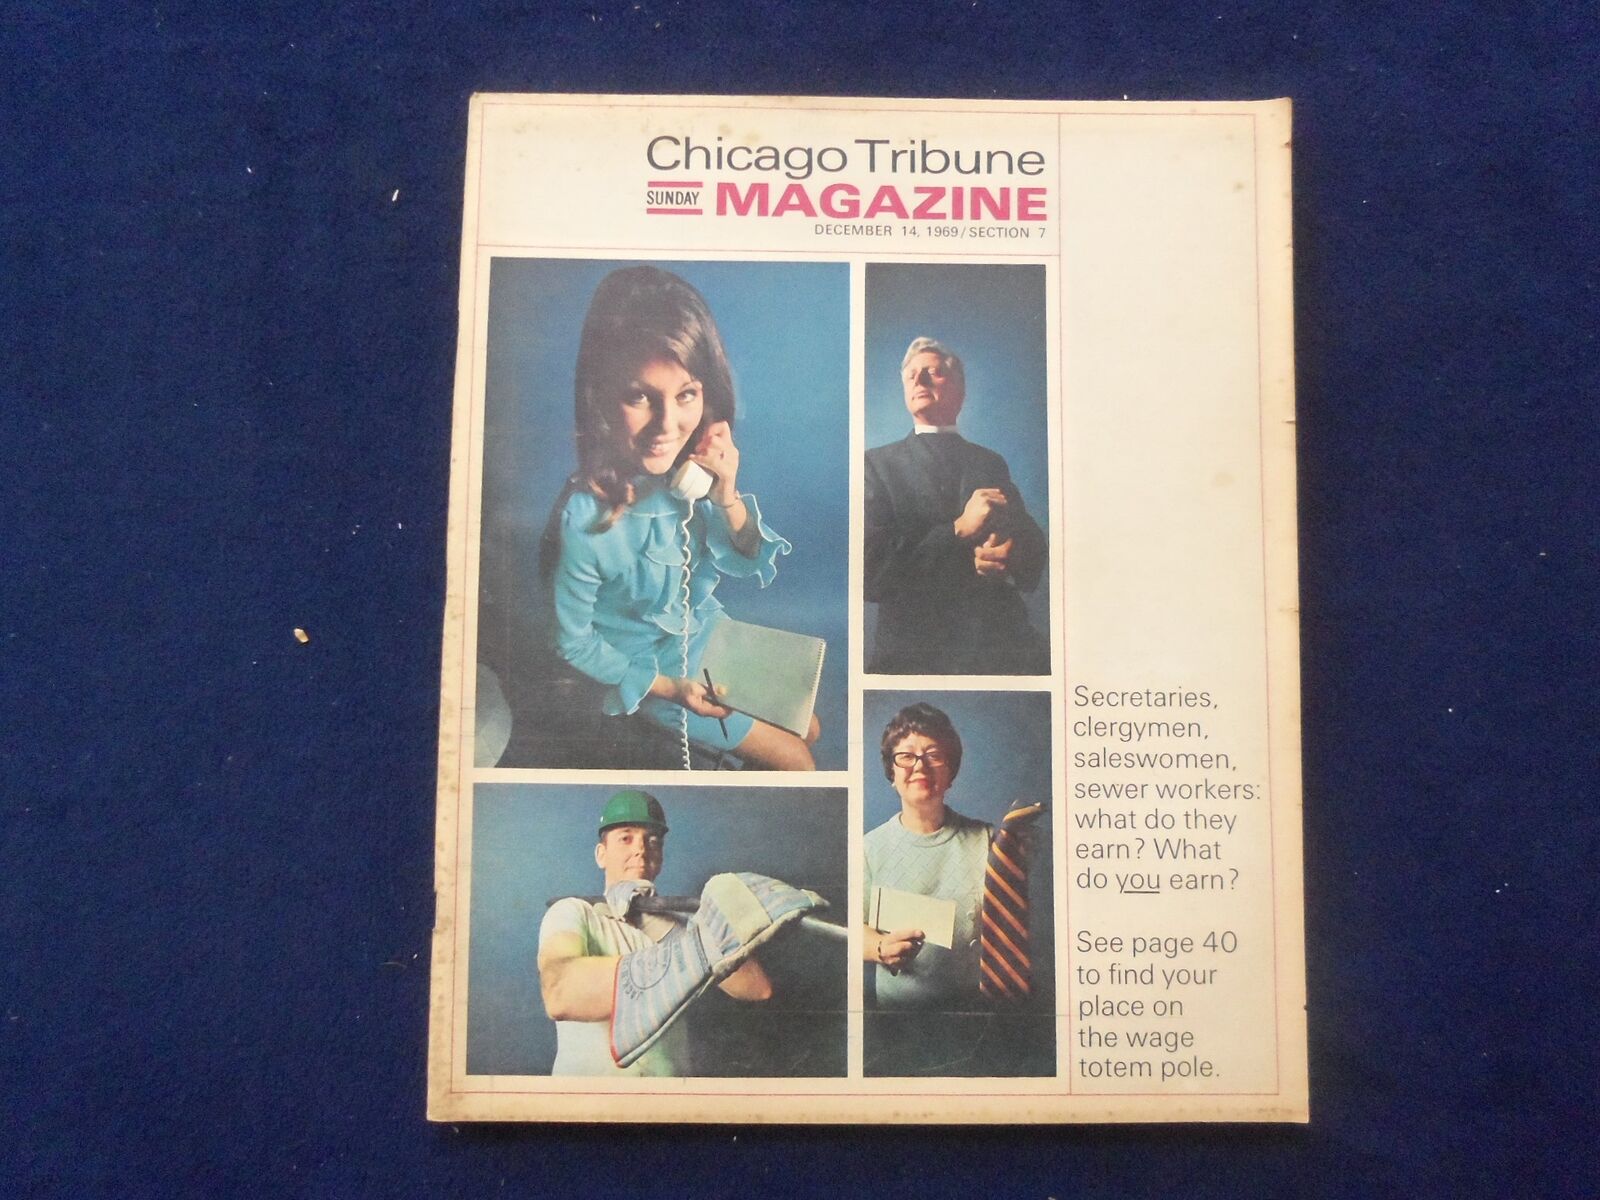 1969 DECEMBER 14 CHICAGO TRIBUNE MAGAZINE SECTION - WHAT DO YOU EARN? - NP 6398